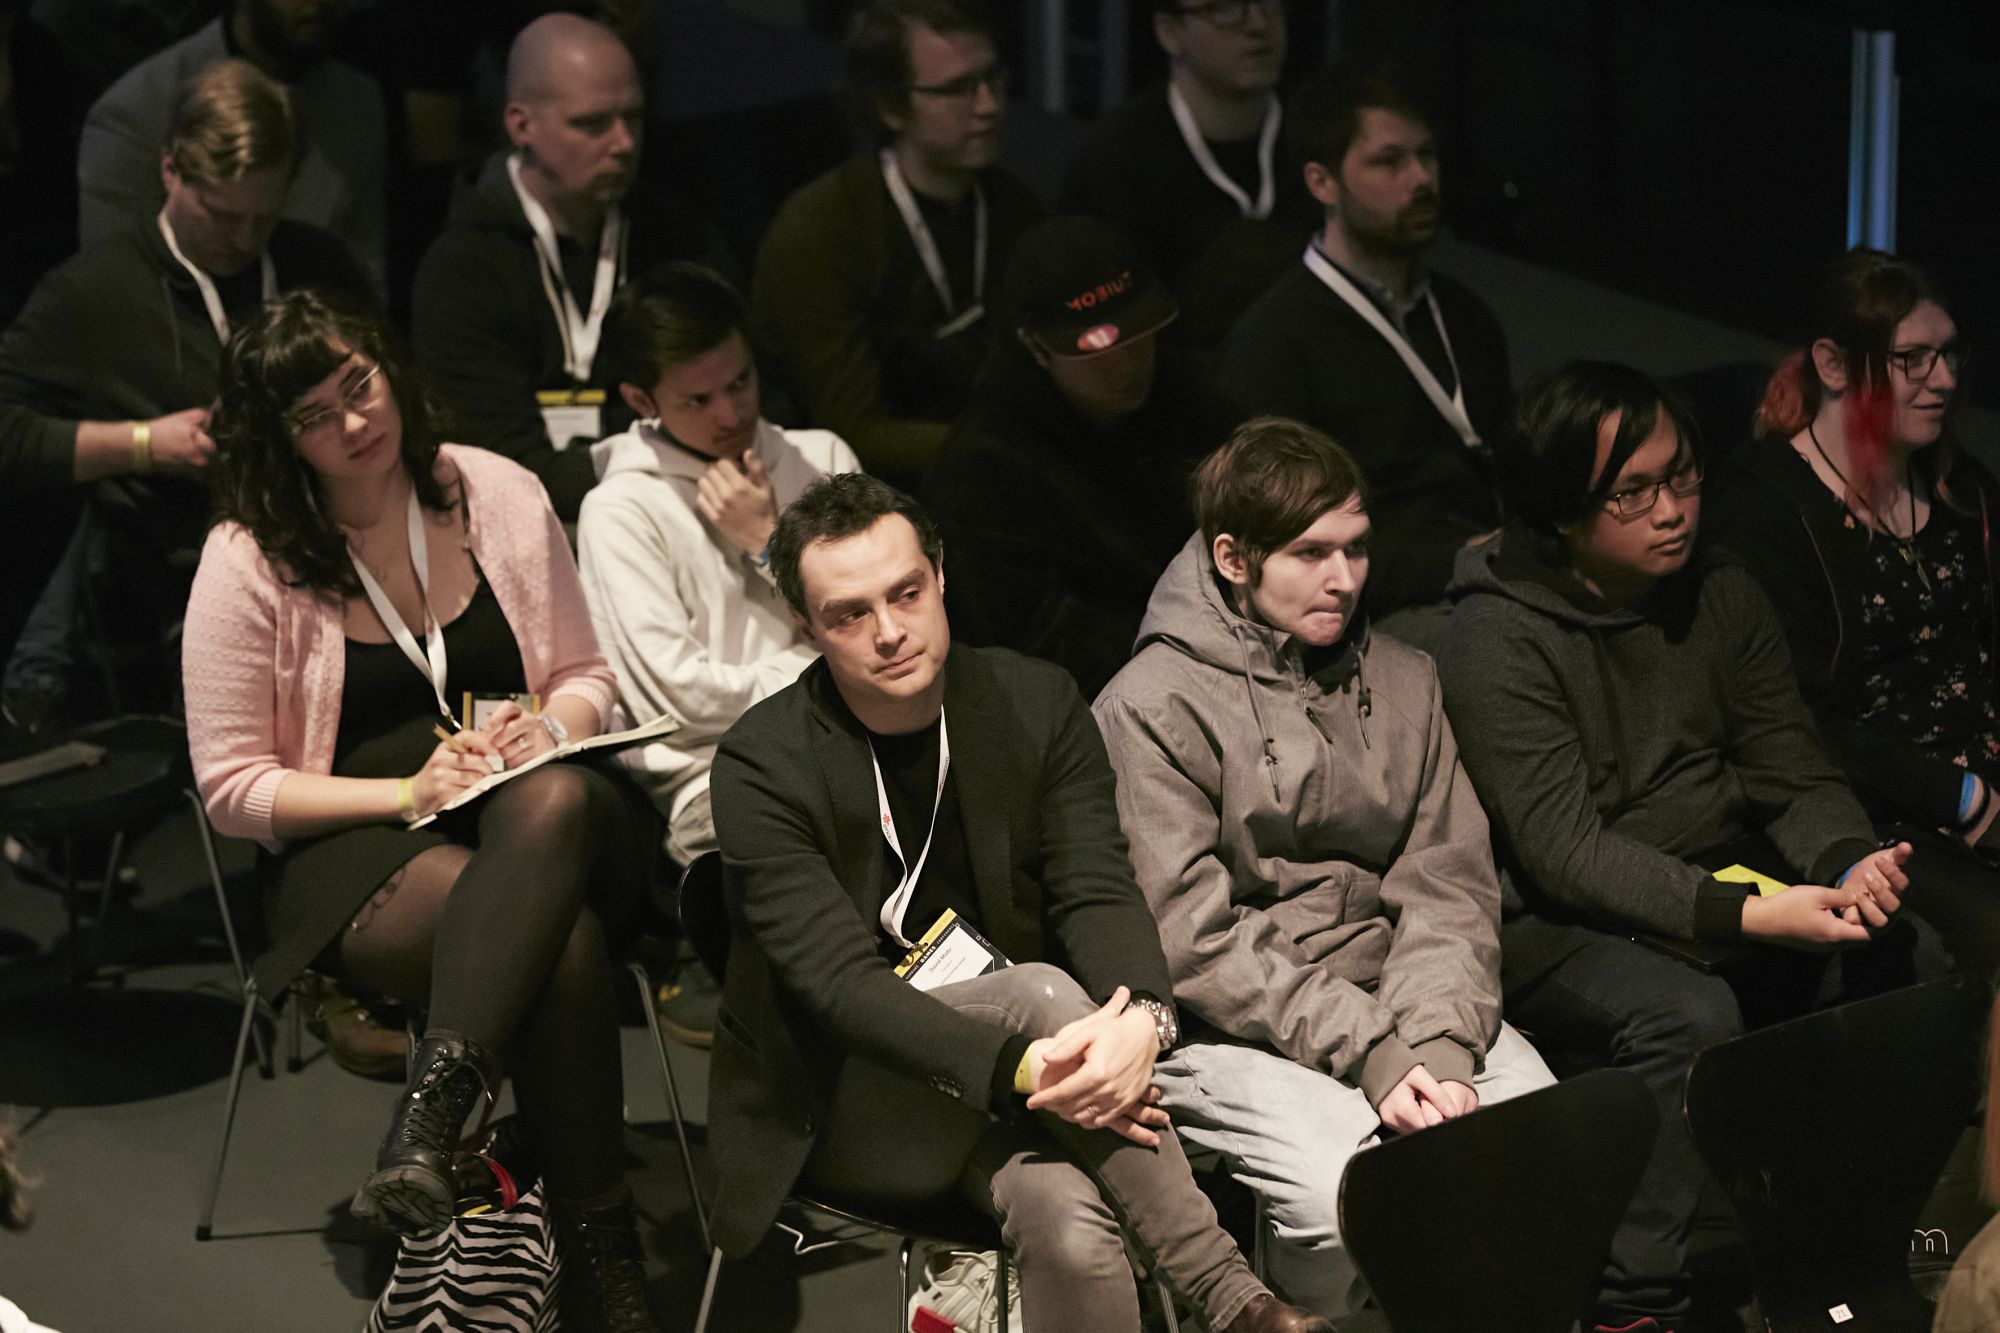 Conference audience at the Hamburg Games Conference 2023 | Photo by Rolf Otzipka